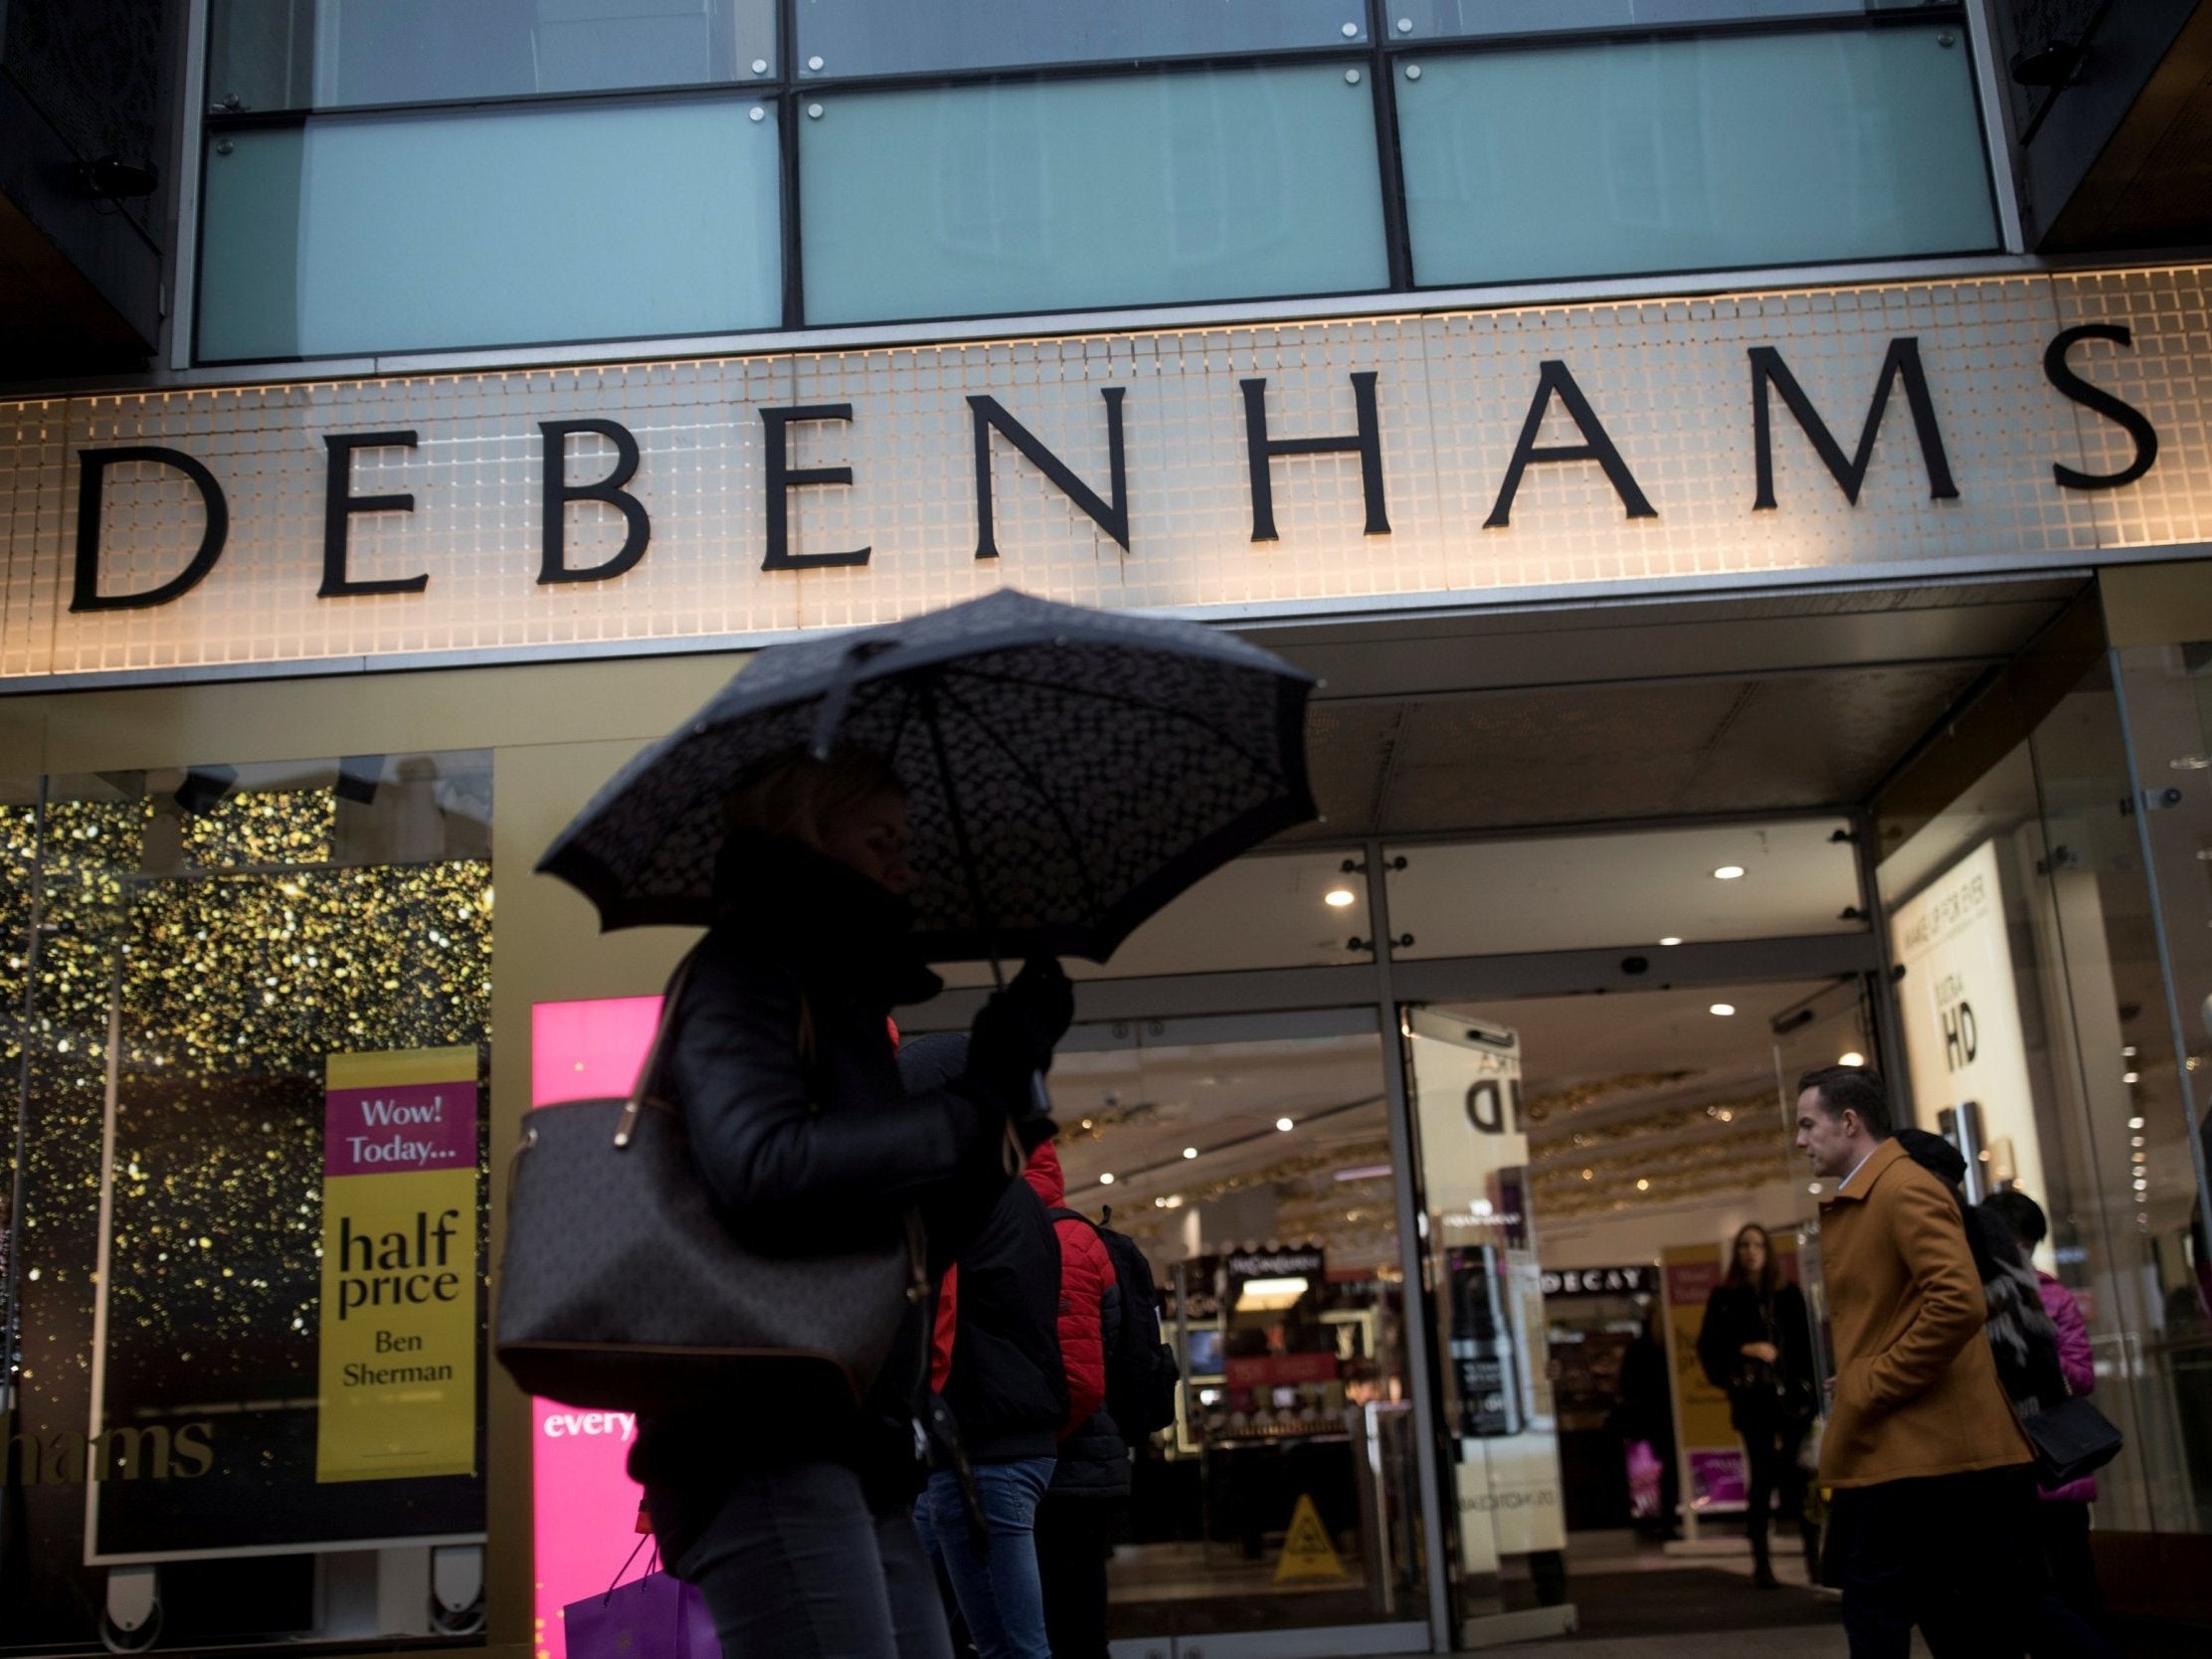 Debenhams has said it is in advanced talks about a £150m refinancing package